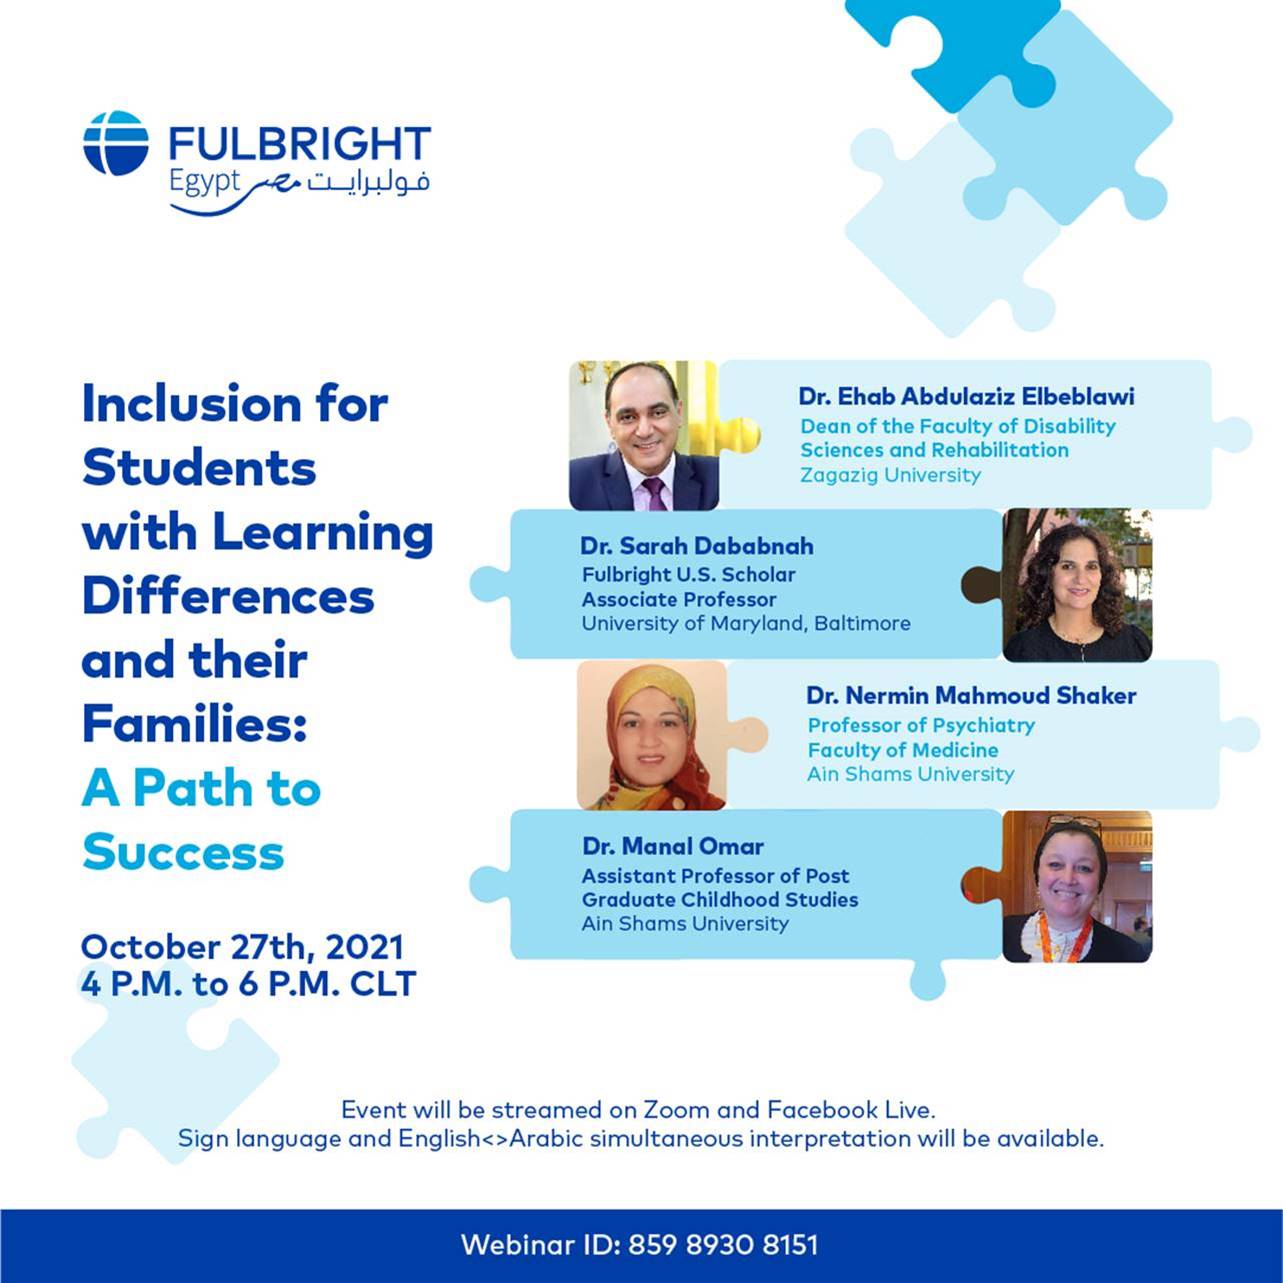 Fulbright Webinar: Inclusion for Students with Learning Differences and their Families: A Path to Success